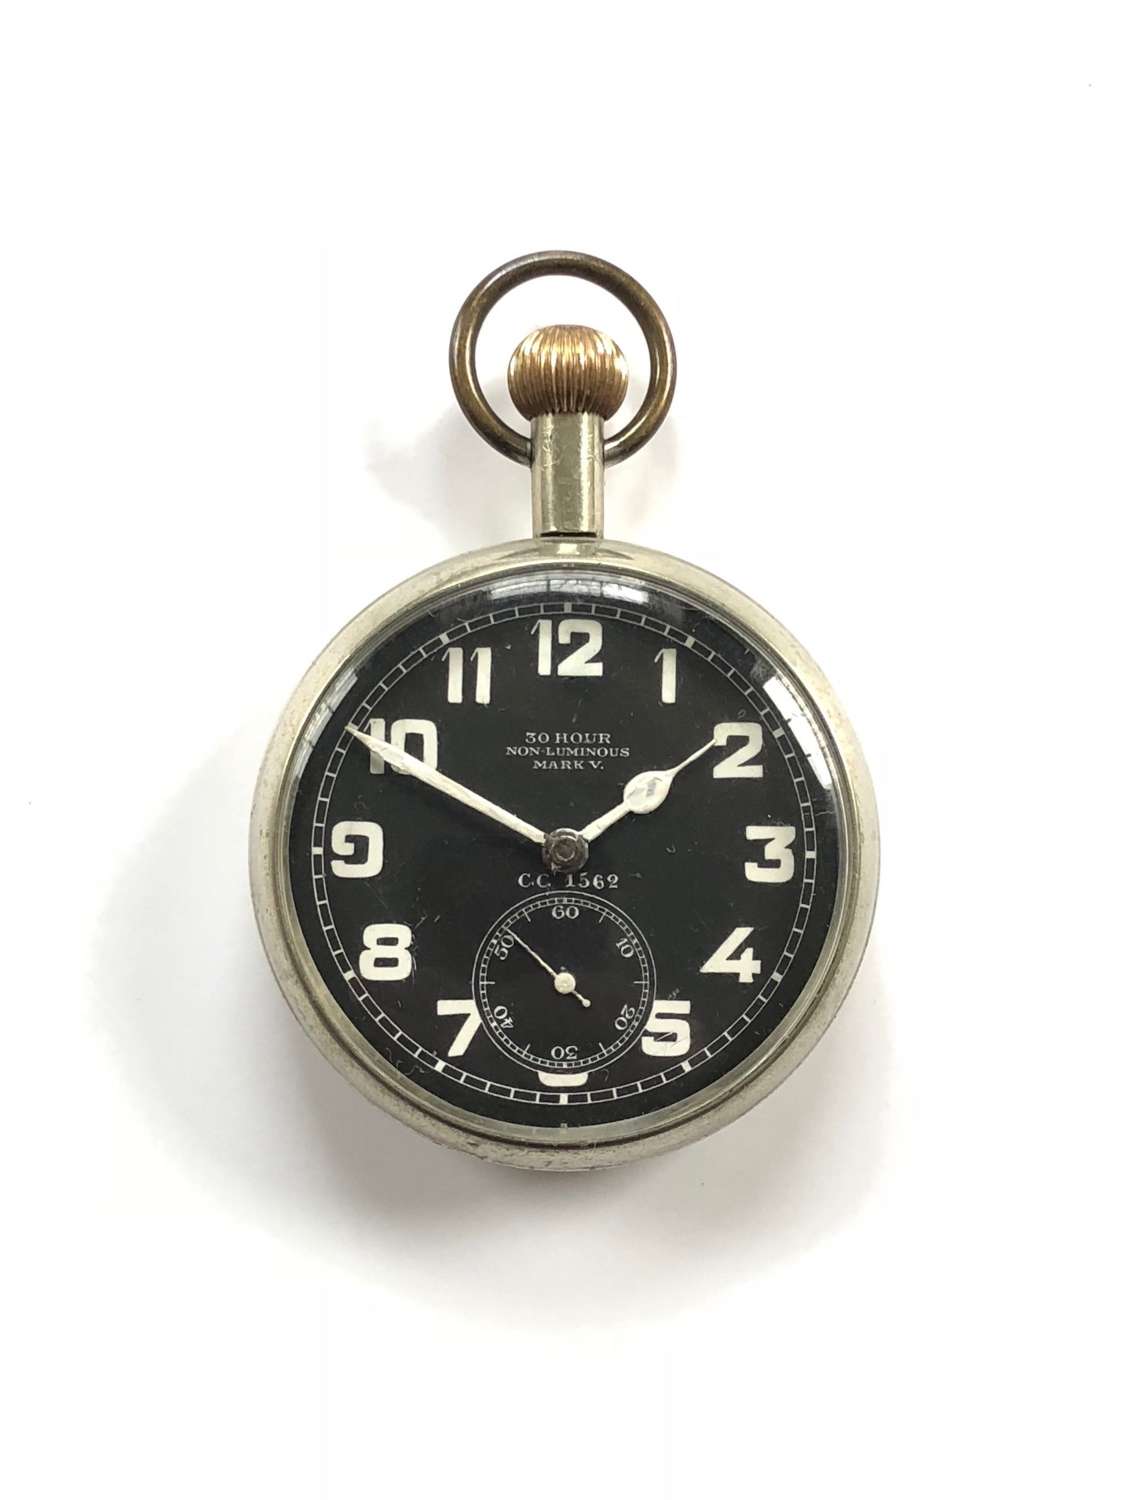 WW1 RFC Royal Flying Corps Issue Aircraft Control Panel Cockpit Watch.